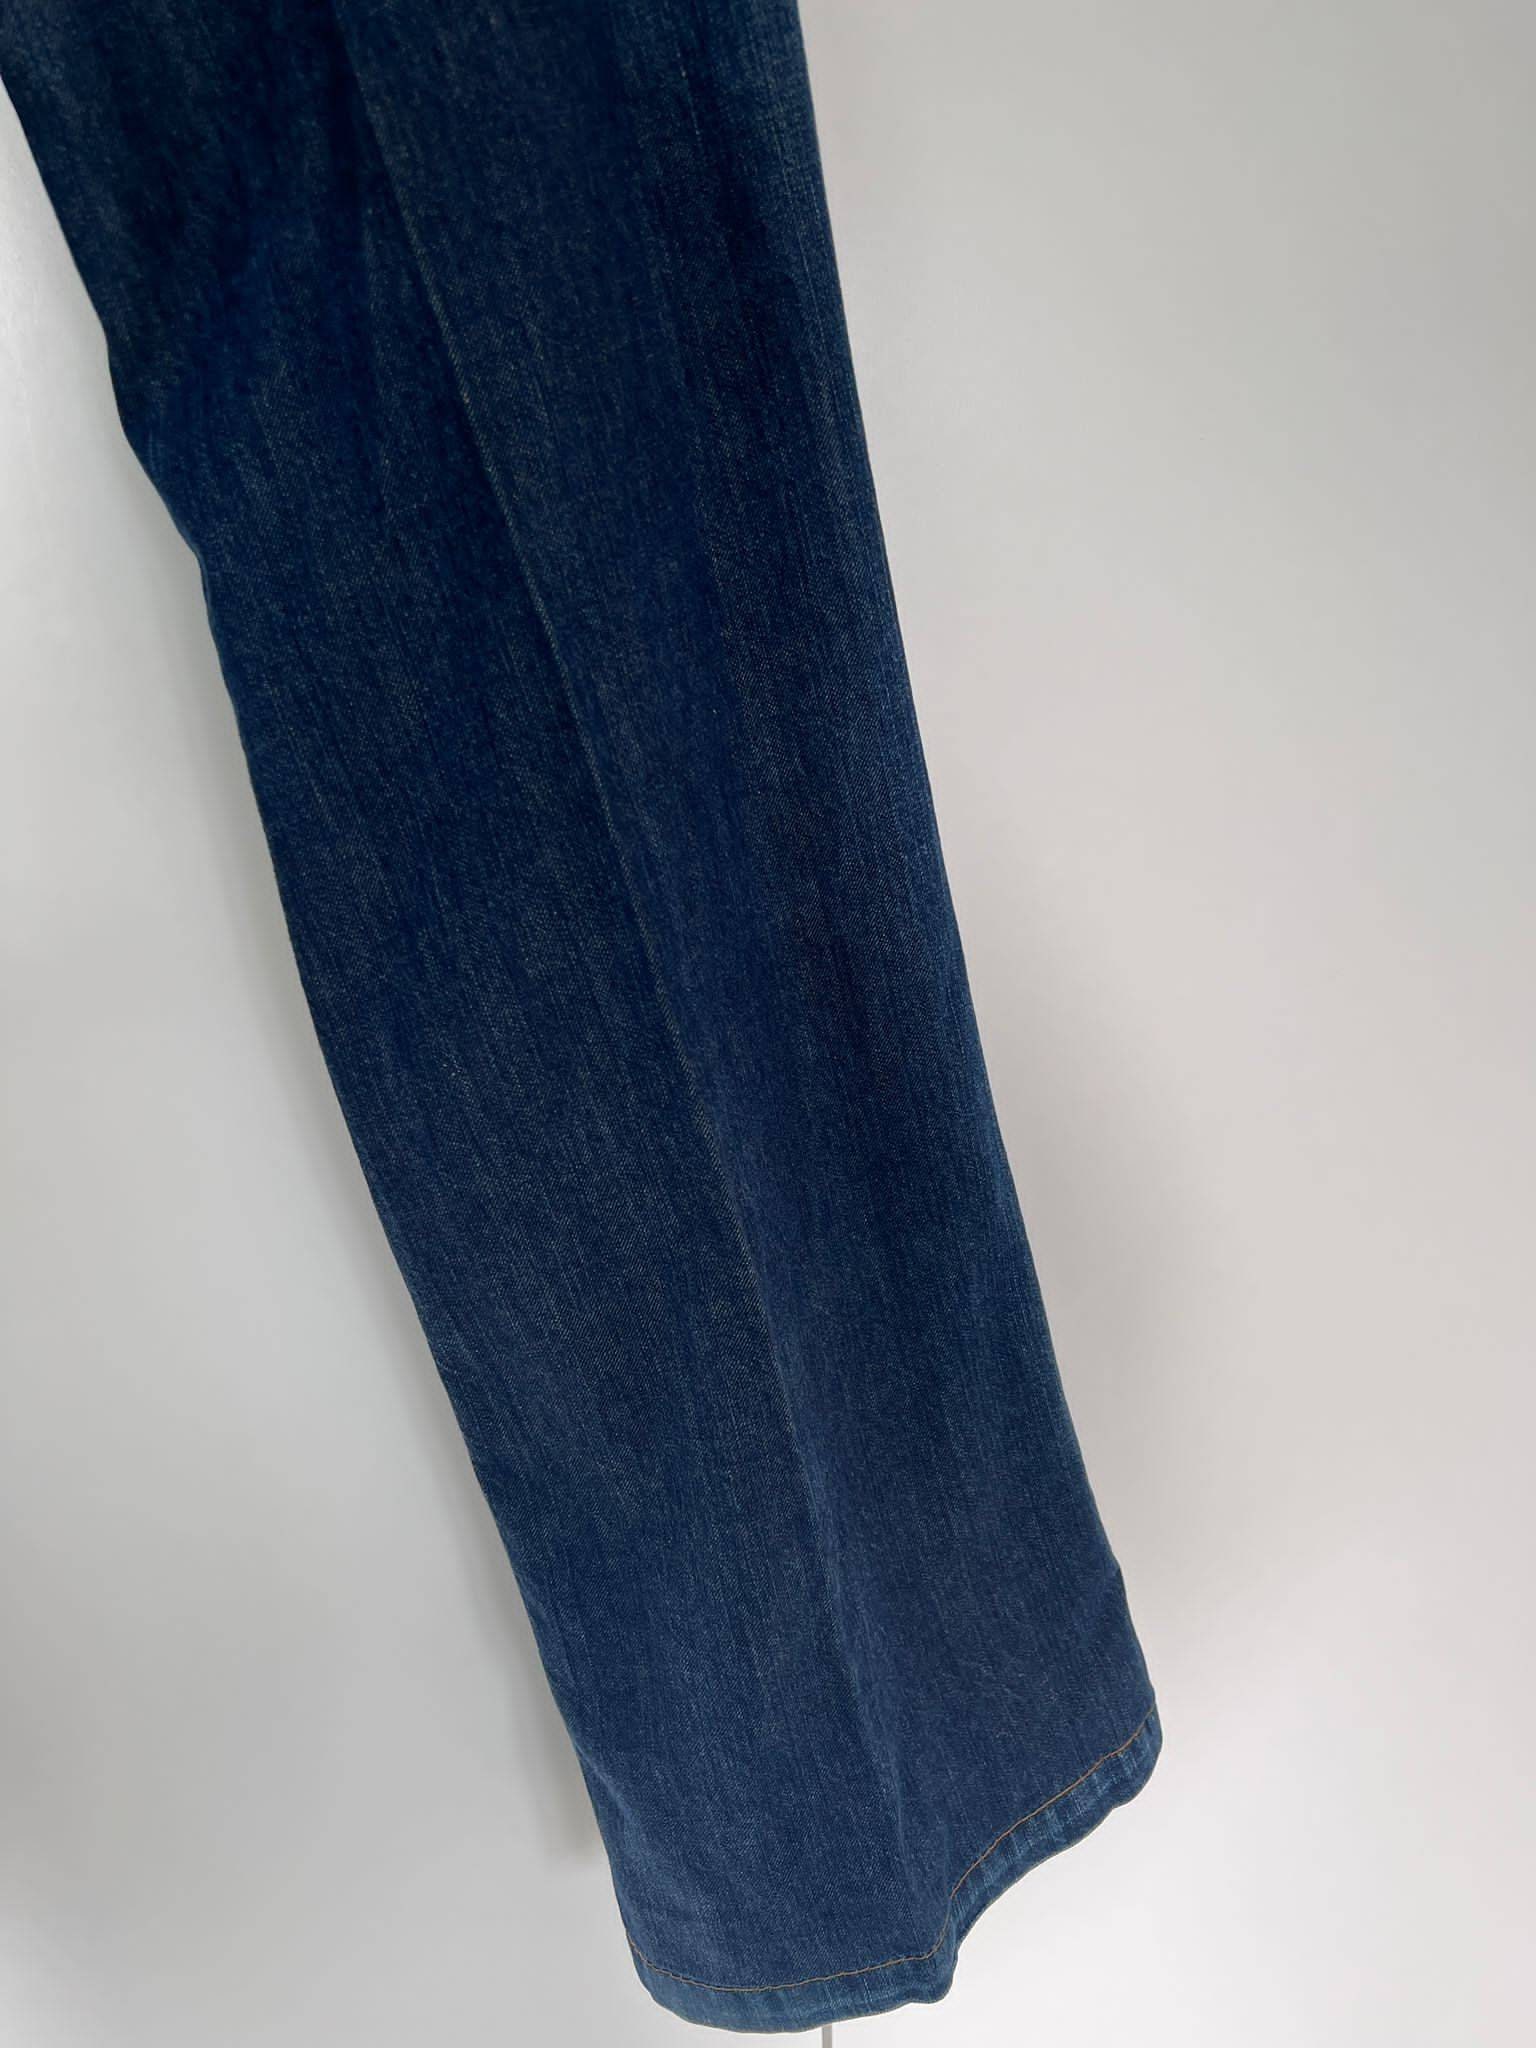 Miss Sixty Italy Vintage S90 Awesome Flared Jeans M - Etsy